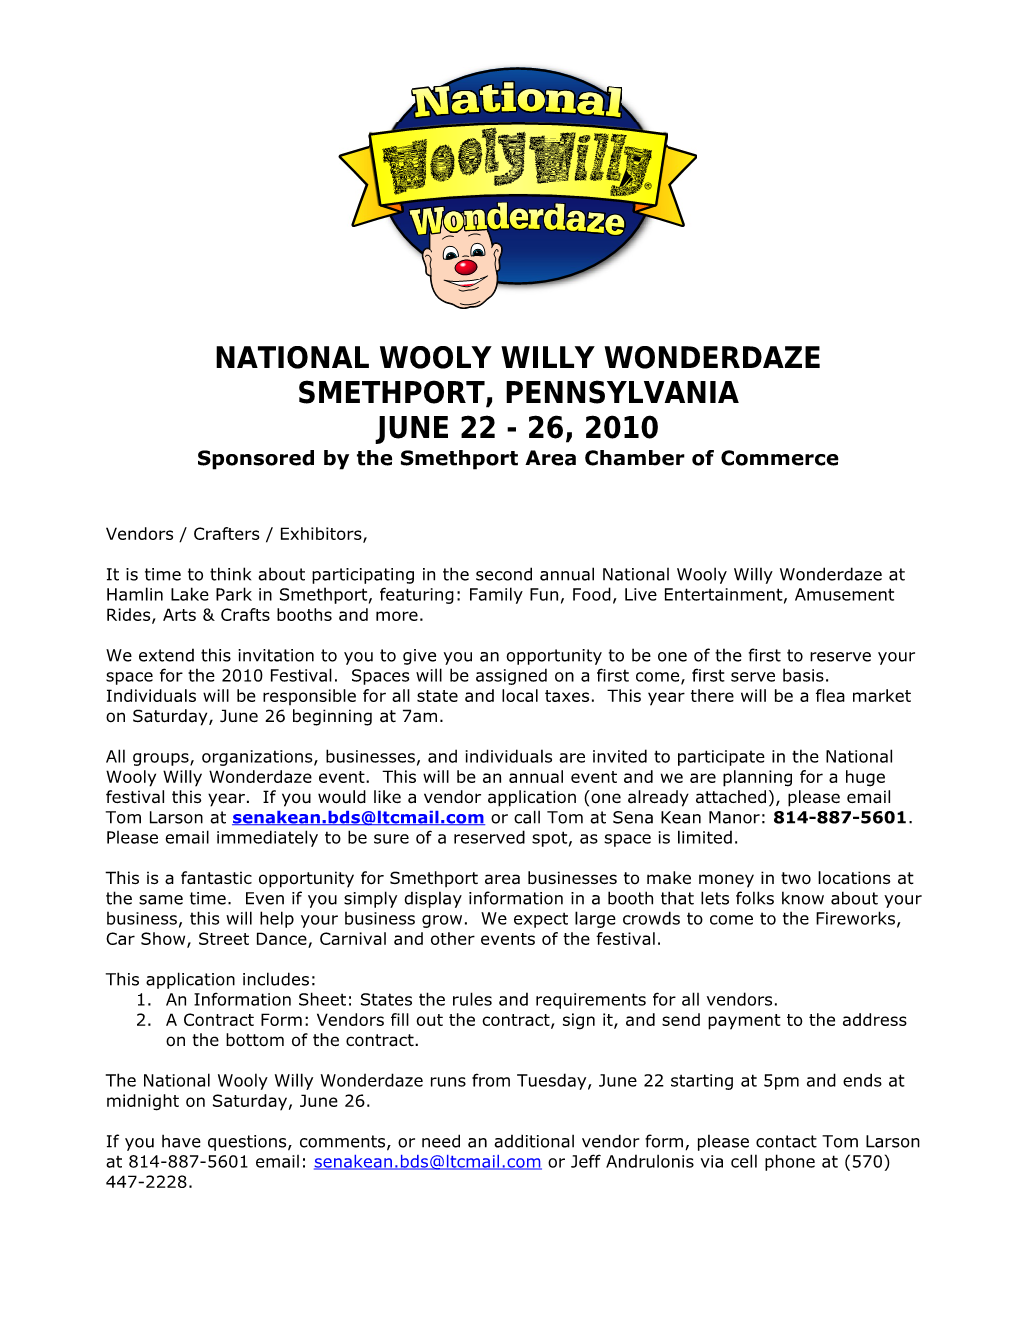 National Wooly Willy Wonderdaze